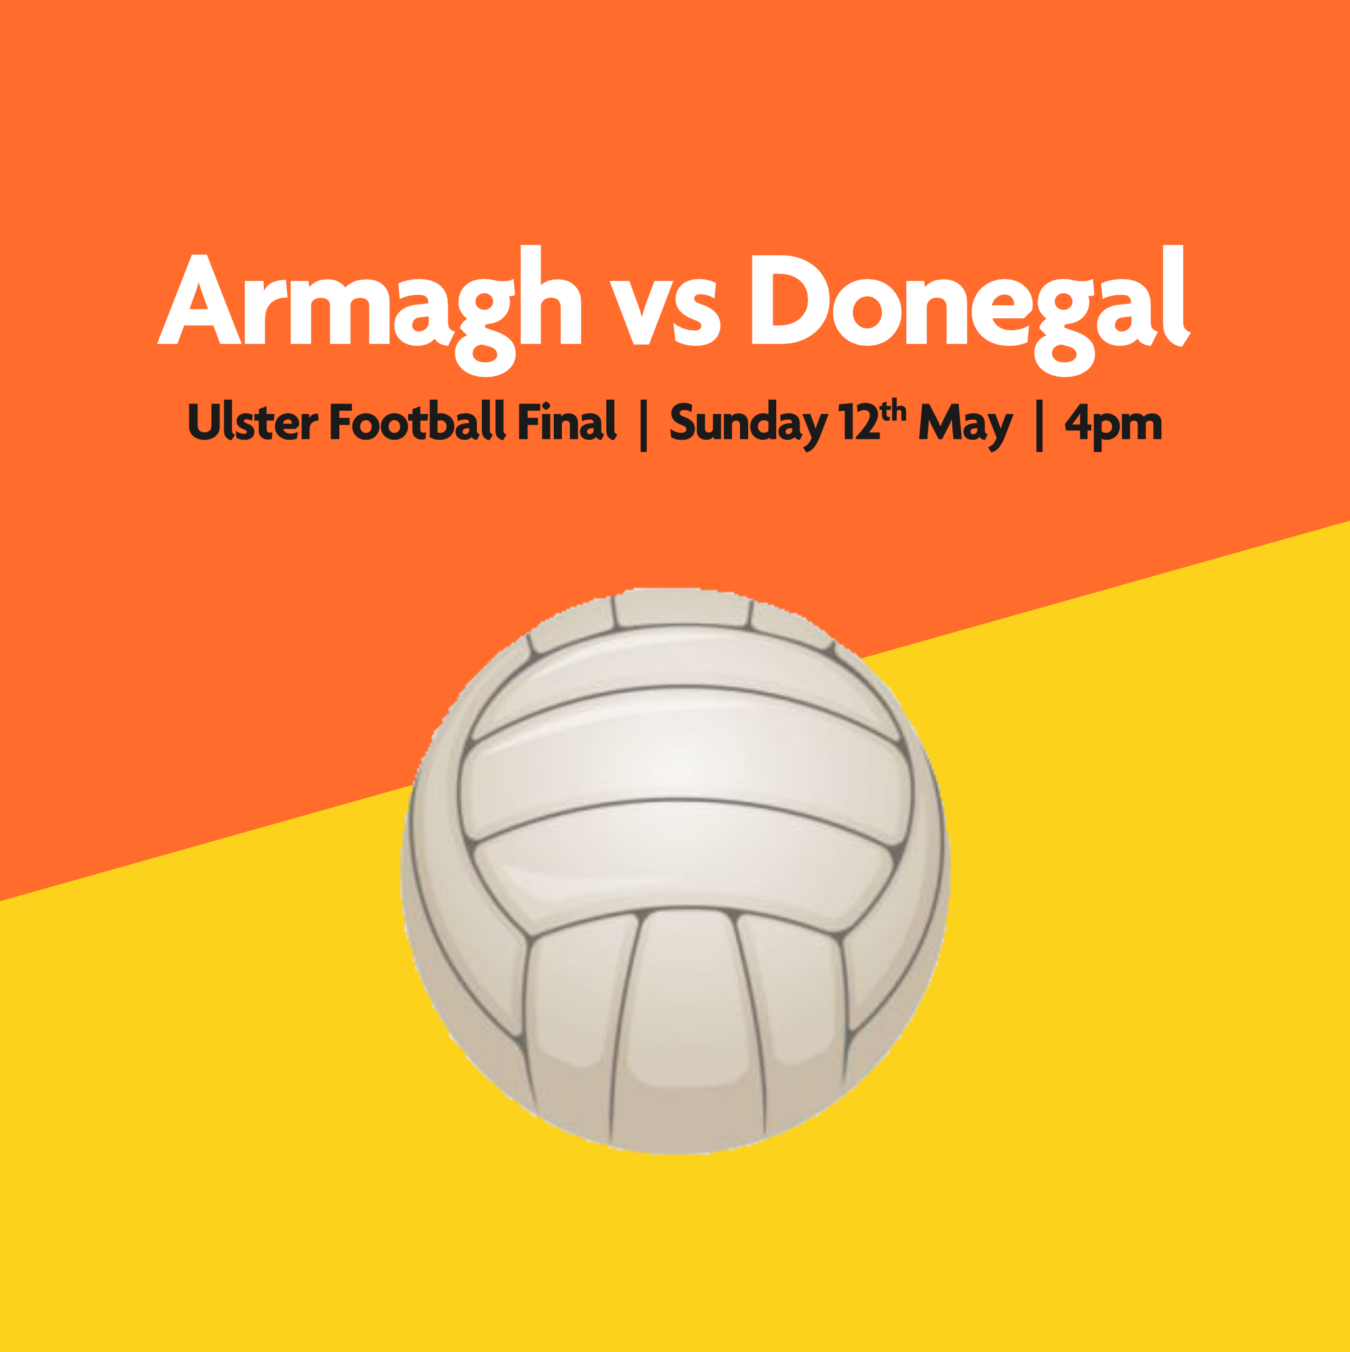 Armagh vs Donegal: Ulster Football Final